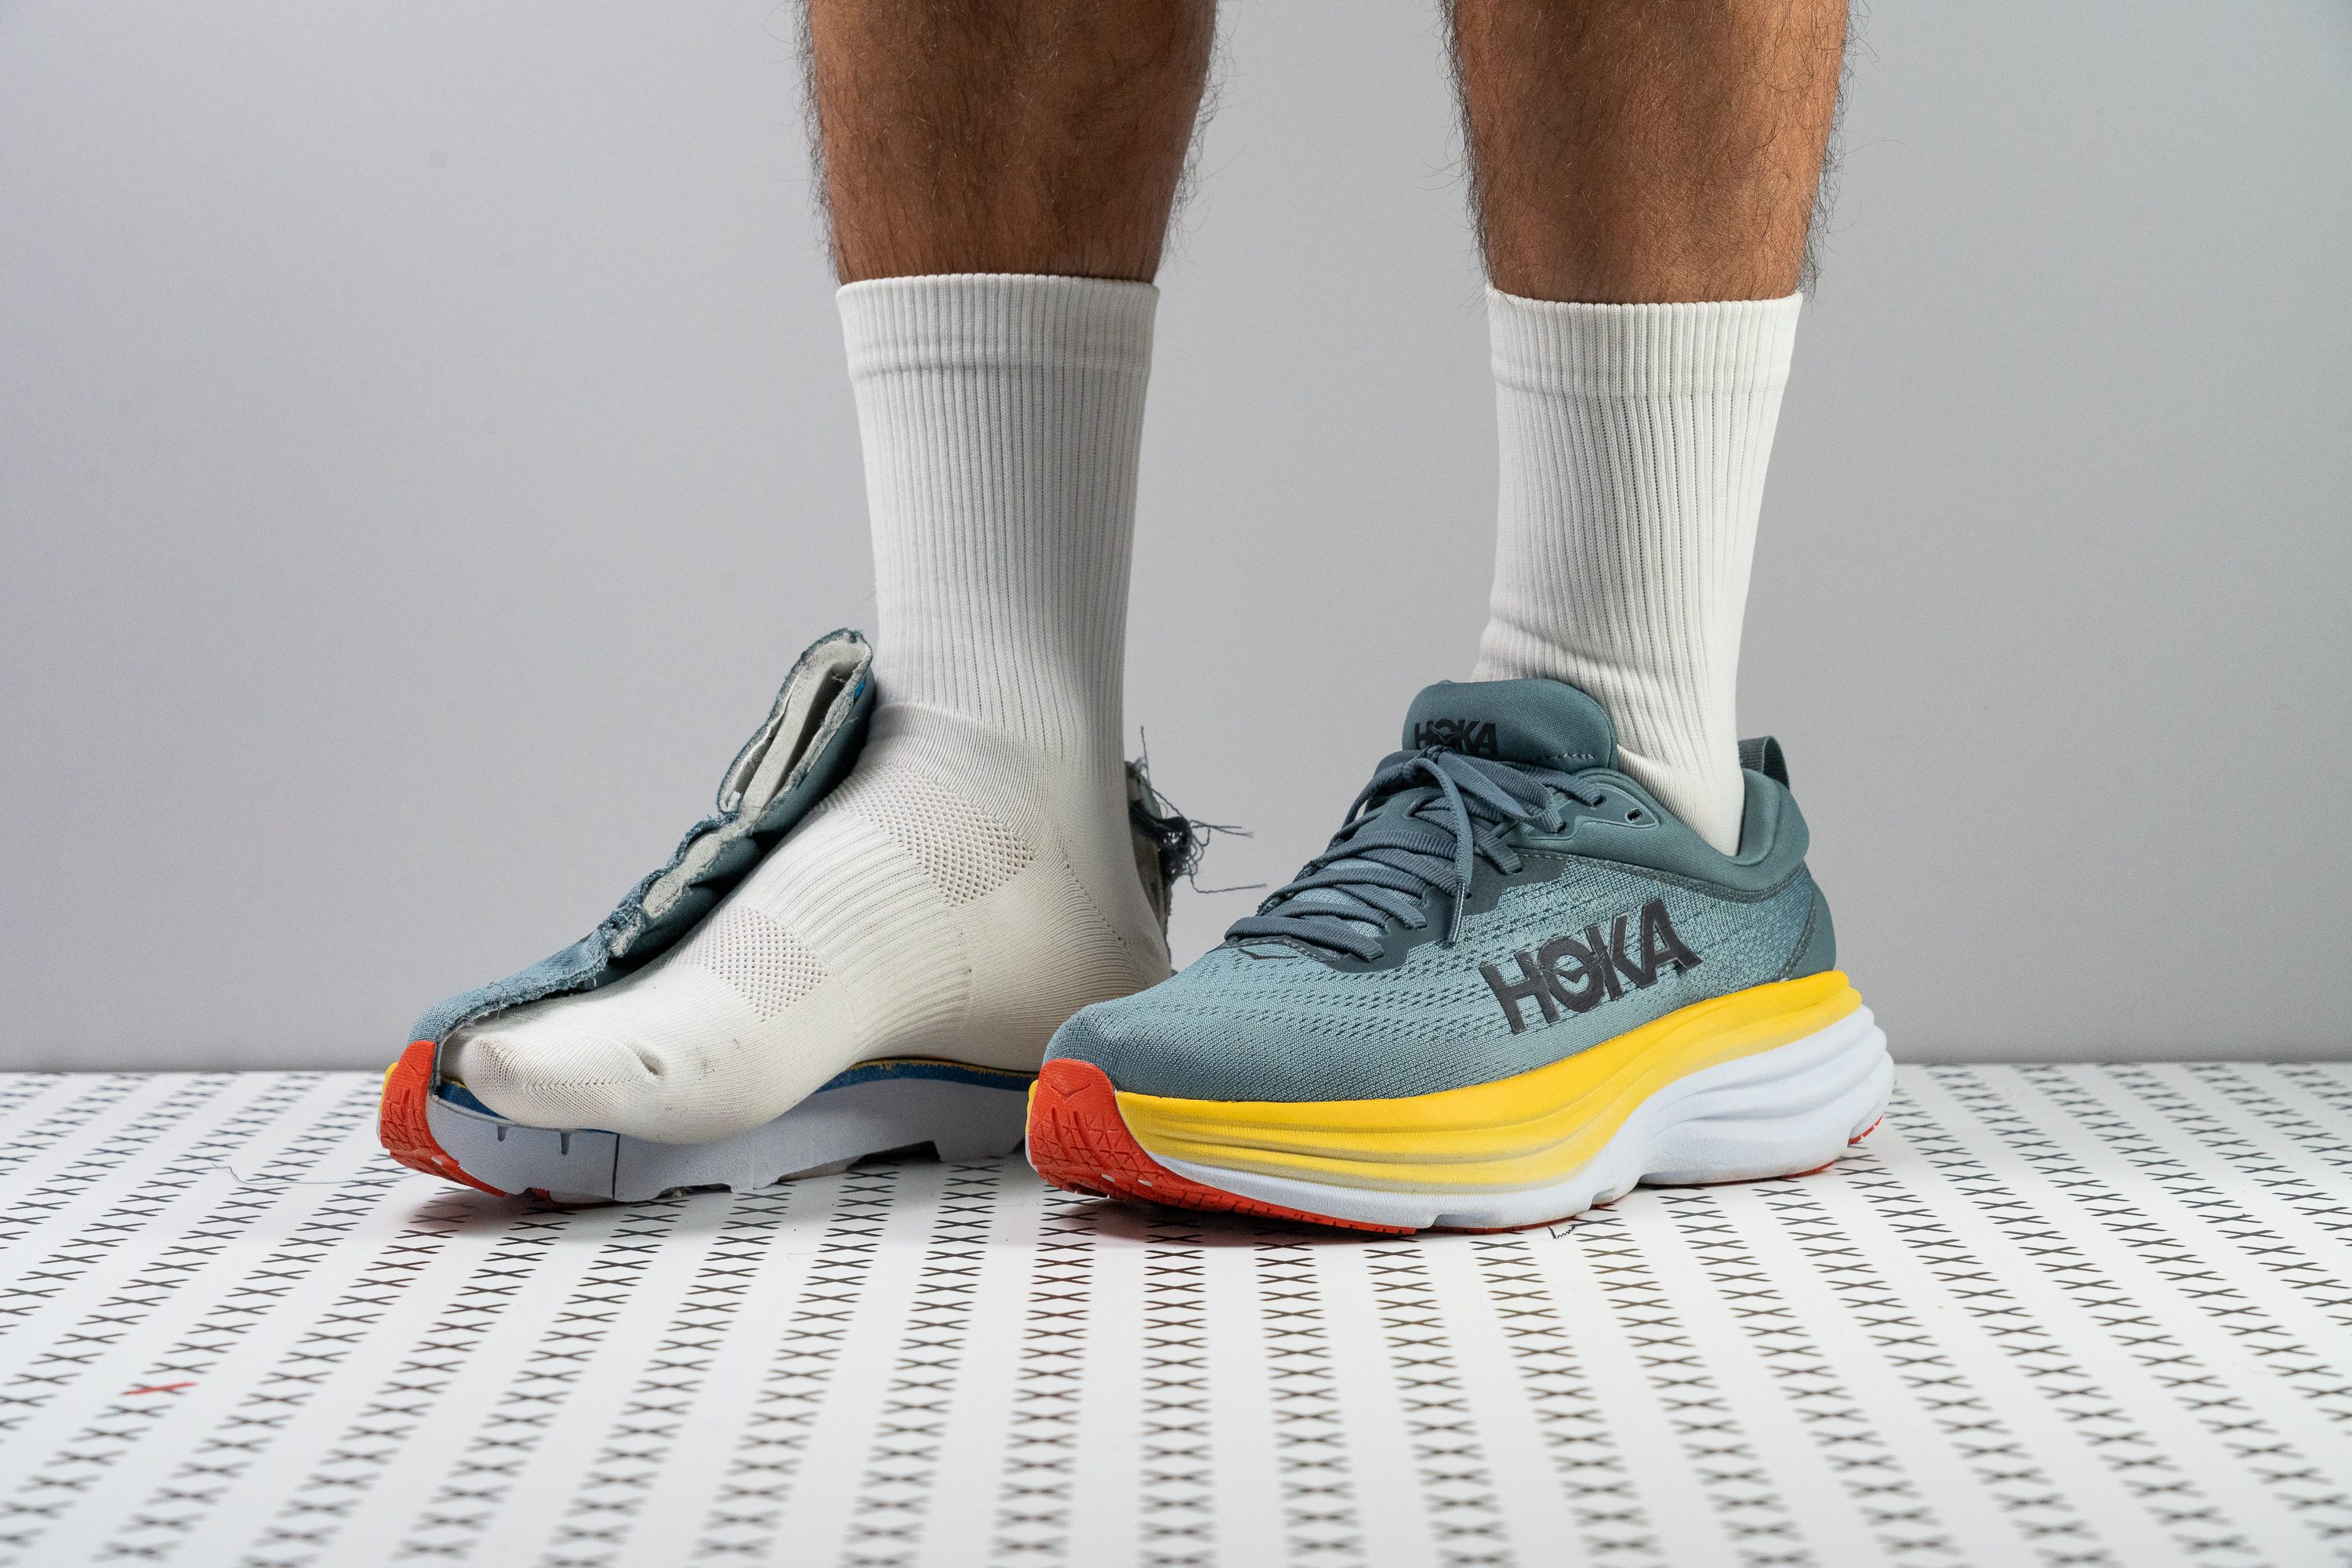 Goes Sheer in Hoka One Ones For a Walk With Chris Pratt